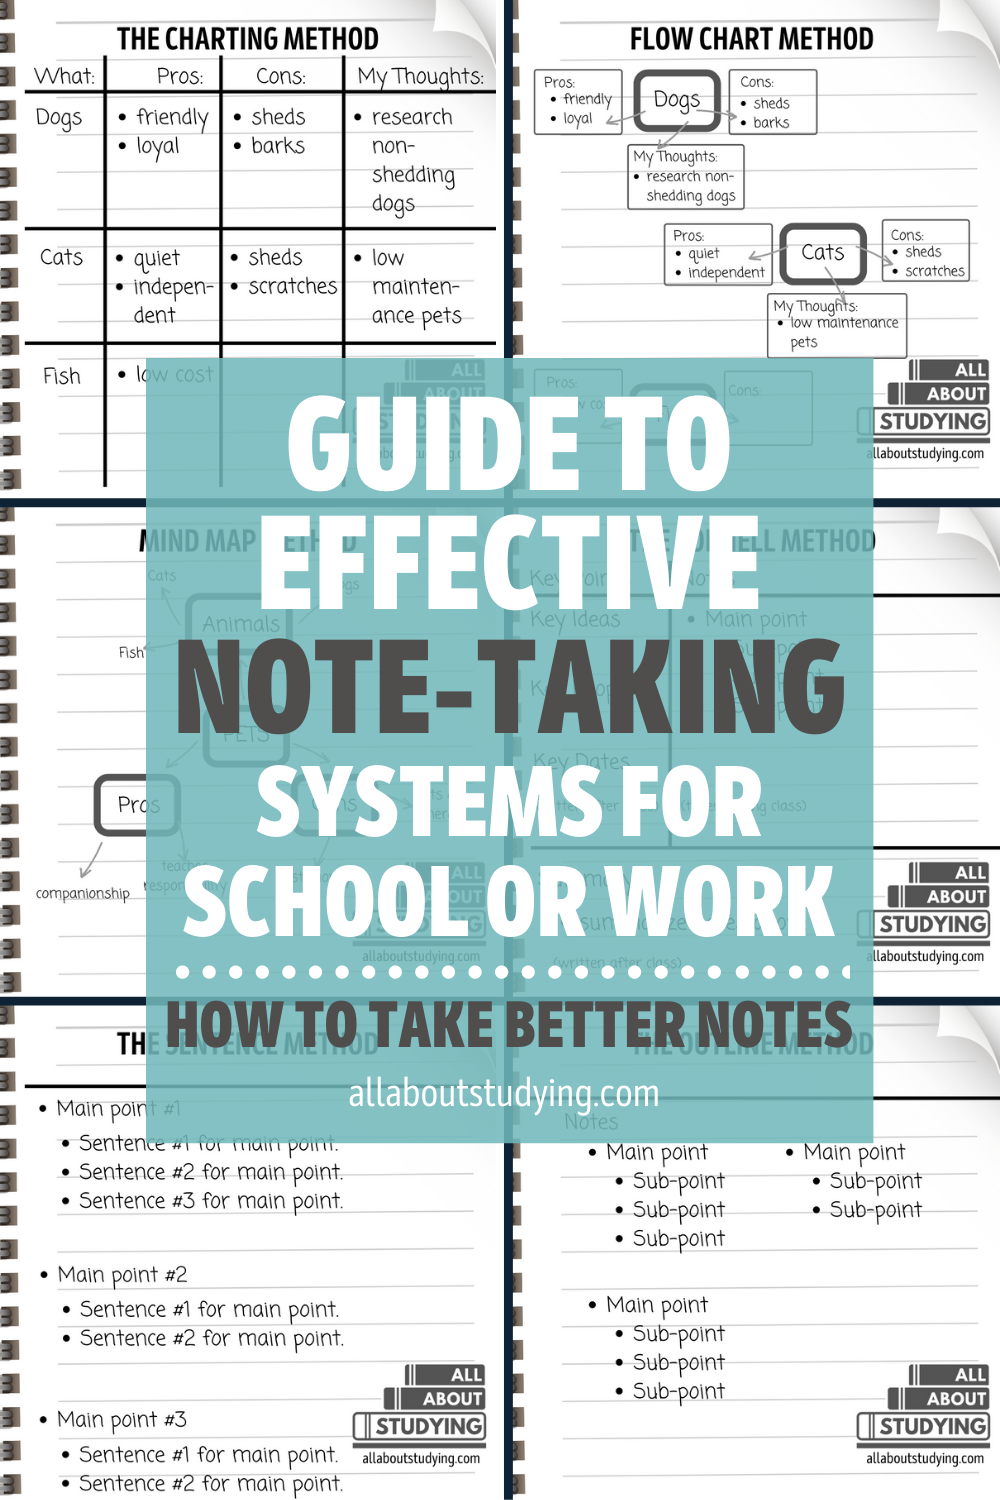 Guide To 6 Effective Note-Taking Systems To Take Better Notes #studying #studyinspiration #notetaking #takingnotes #studyblr #sutdywithme